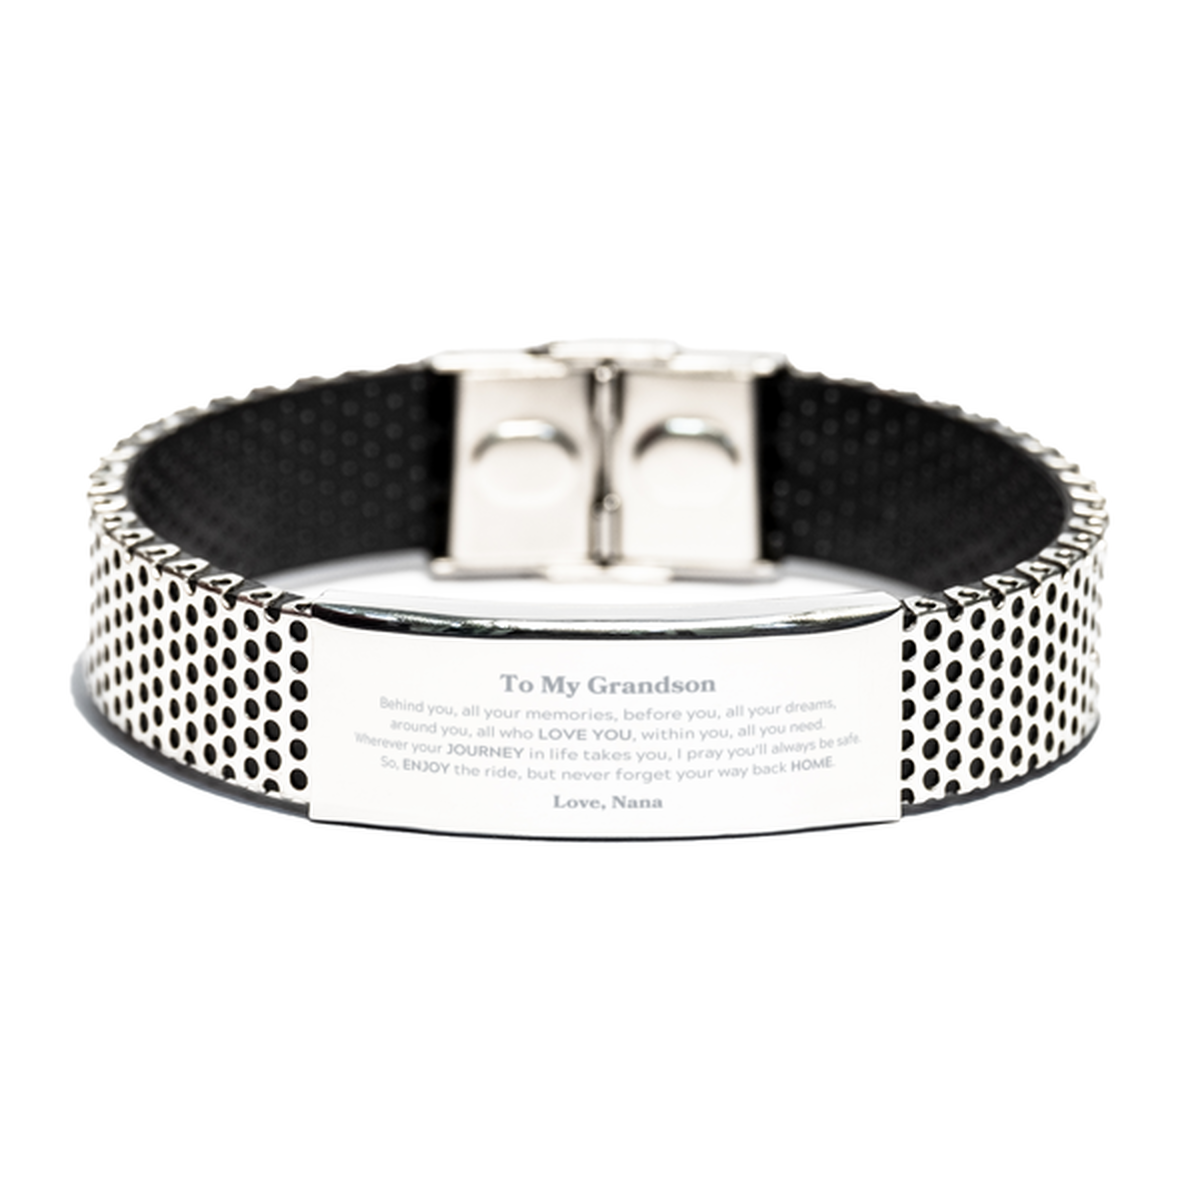 To My Grandson Graduation Gifts from Nana, Grandson Stainless Steel Bracelet Christmas Birthday Gifts for Grandson Behind you, all your memories, before you, all your dreams. Love, Nana